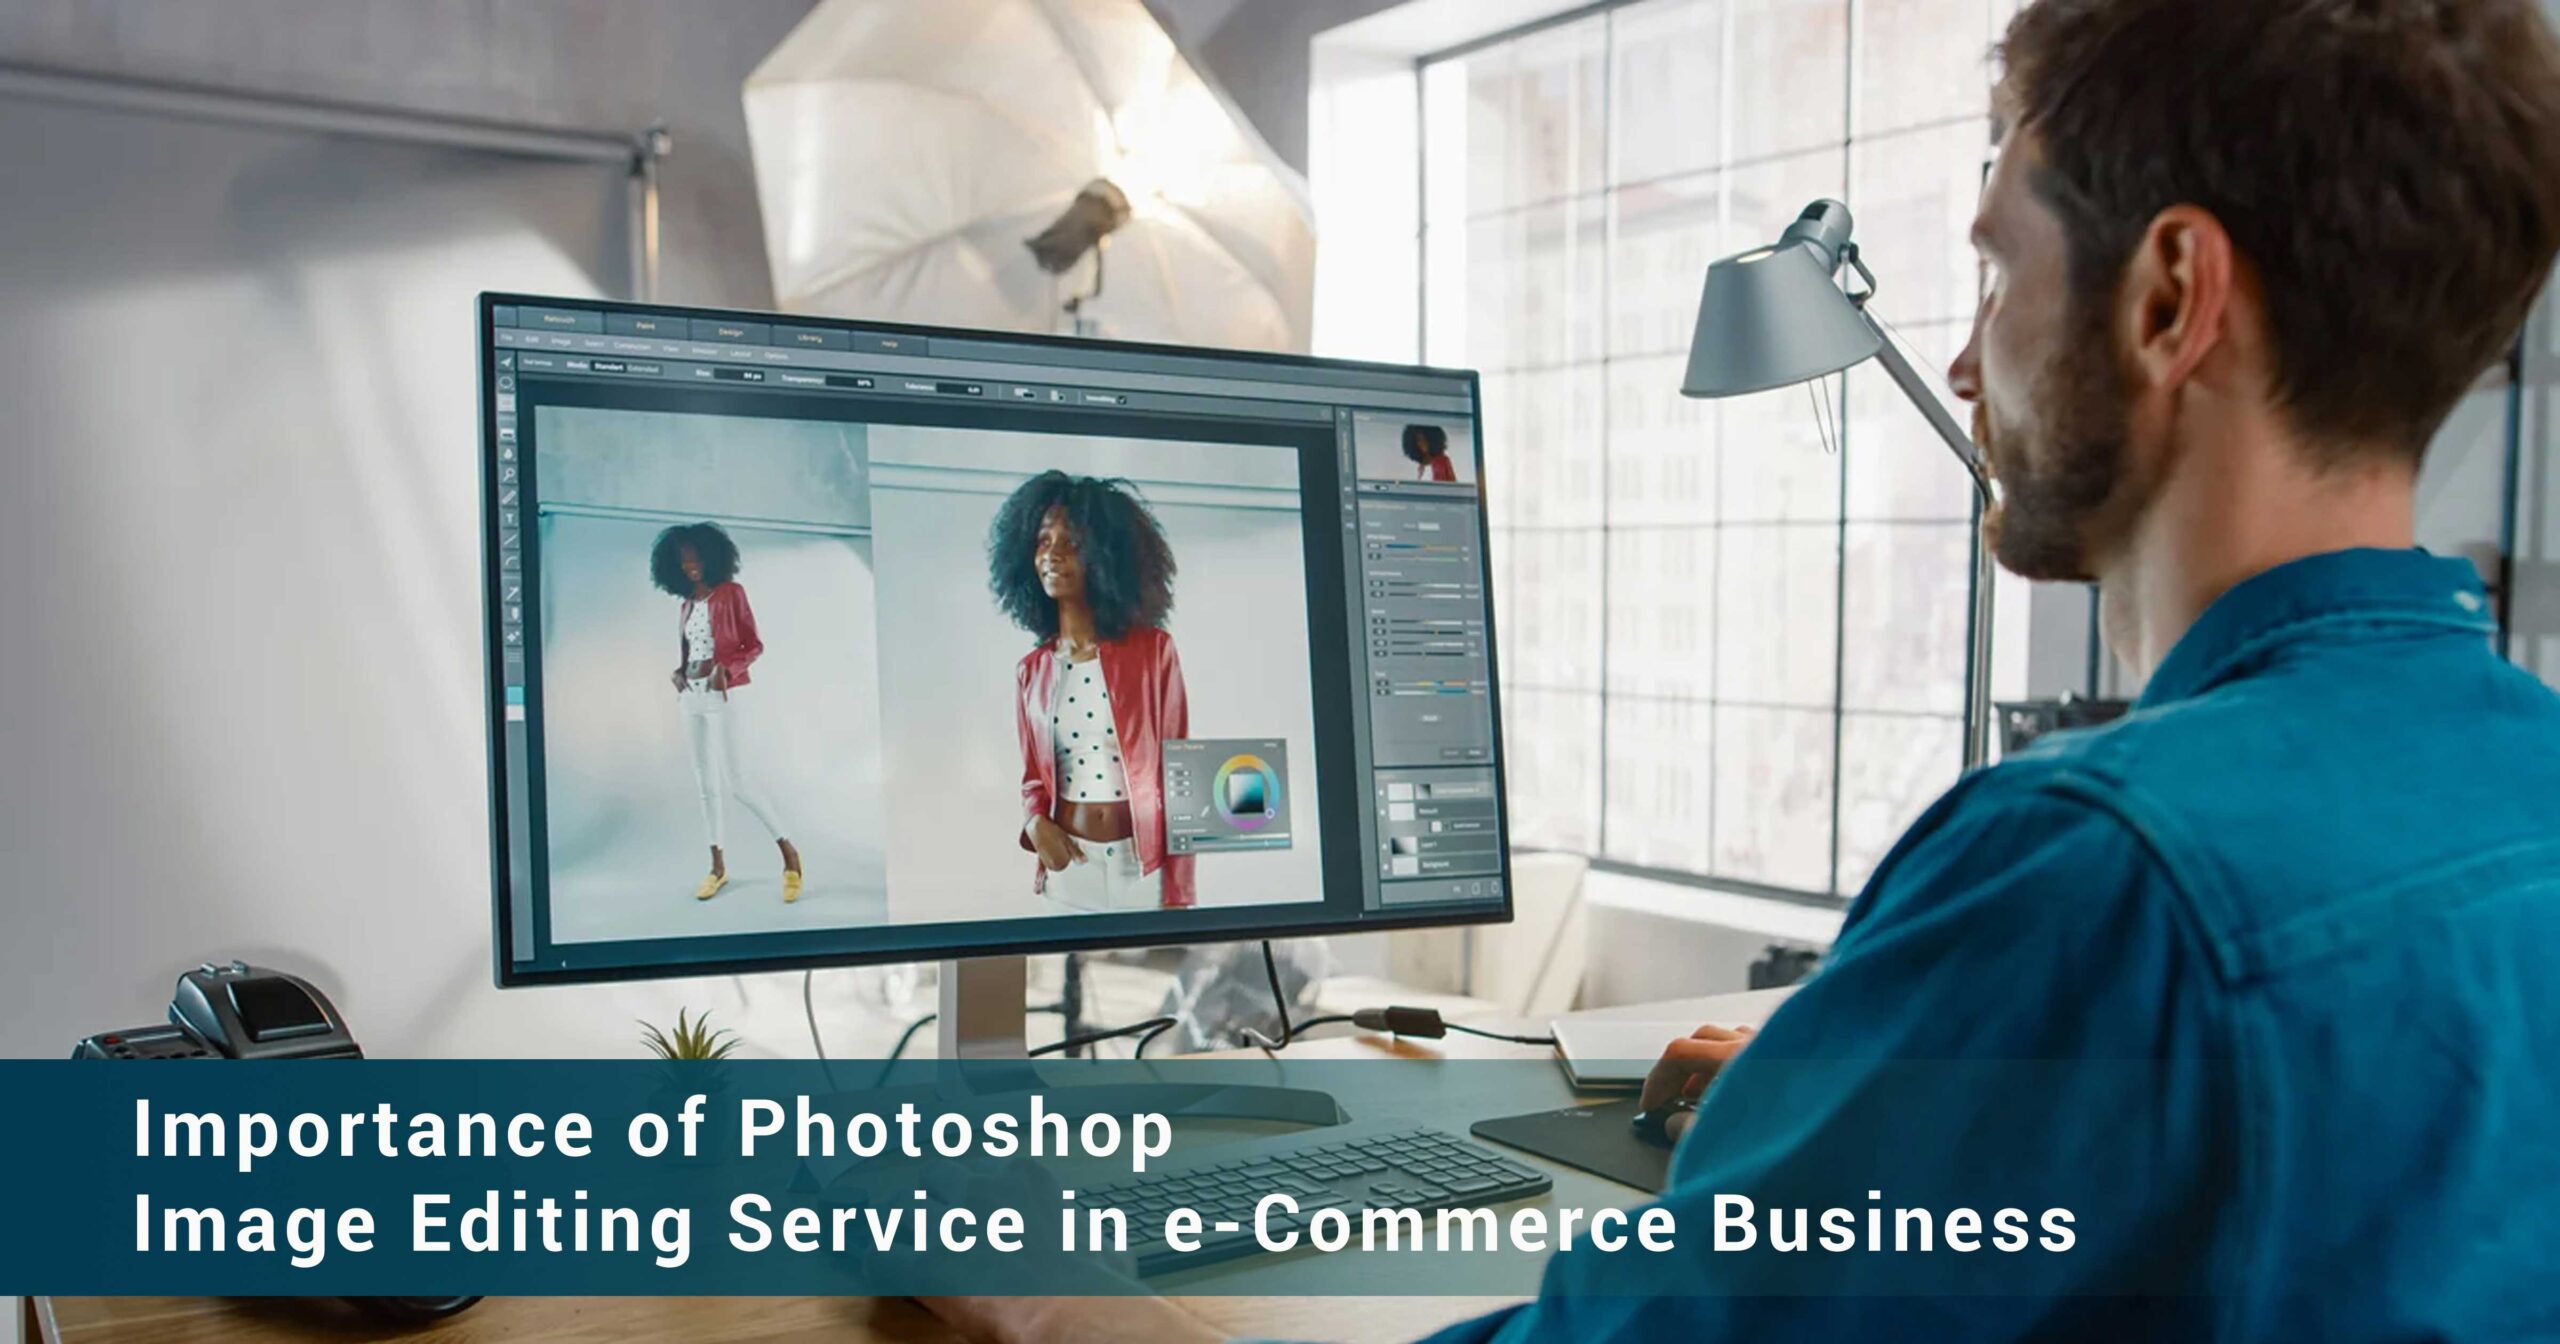 Importance of Photoshop Image Editing Service in eCommerce Business